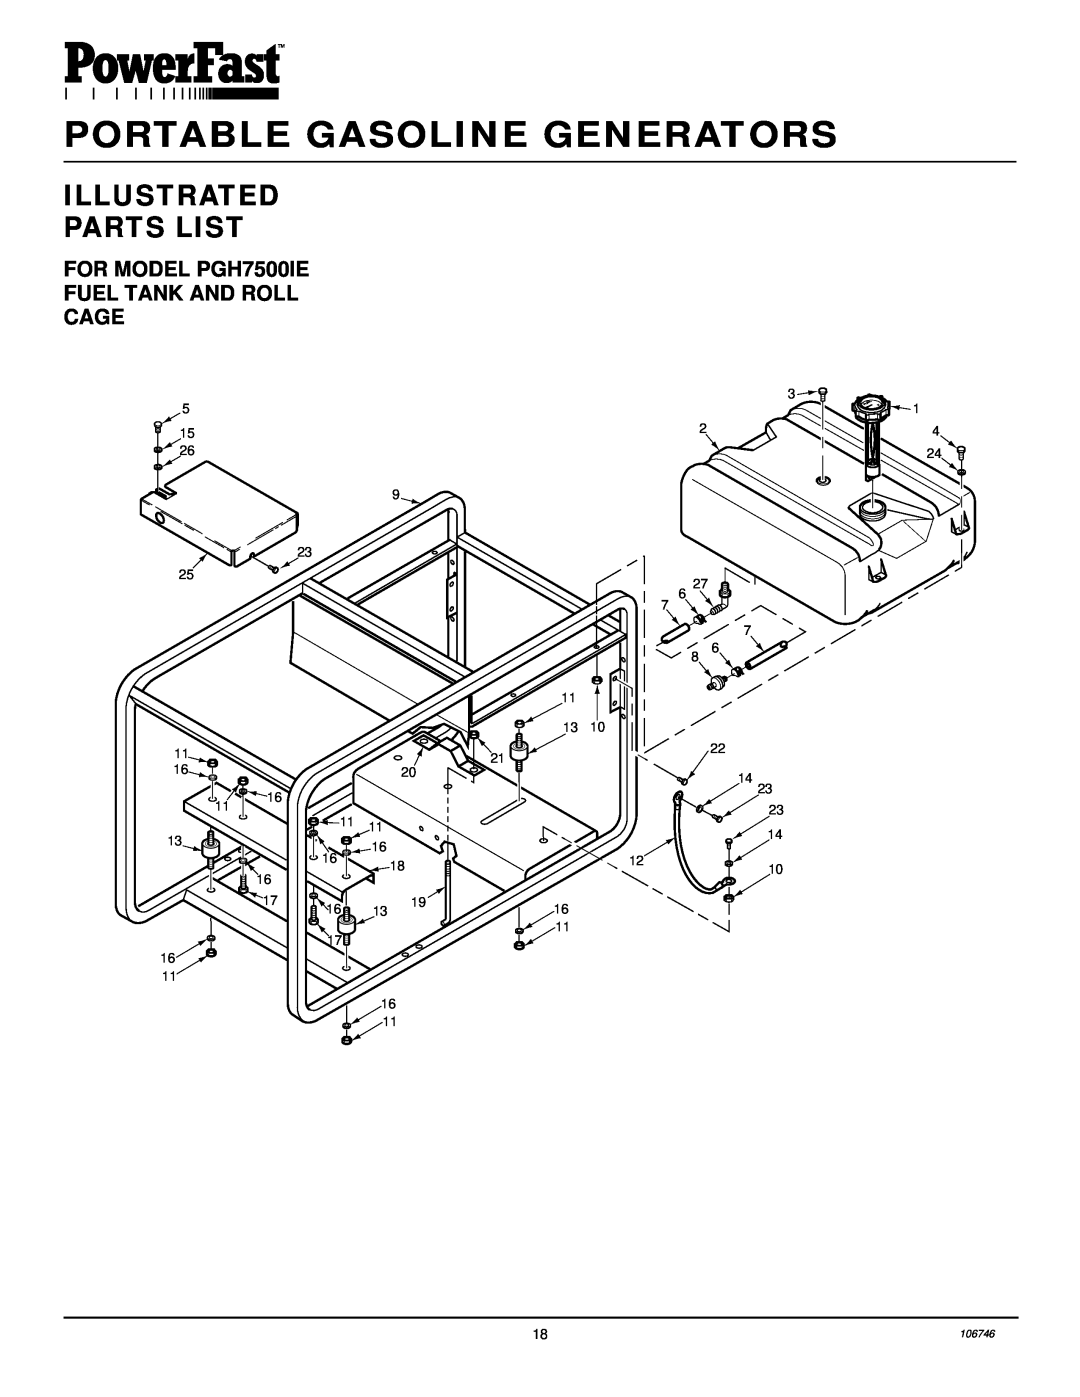 Desa PGH7500IE, PGH1100IE installation manual Illustrated Parts List, FOR MODEL PGH7500IE FUEL TANK AND ROLL CAGE 